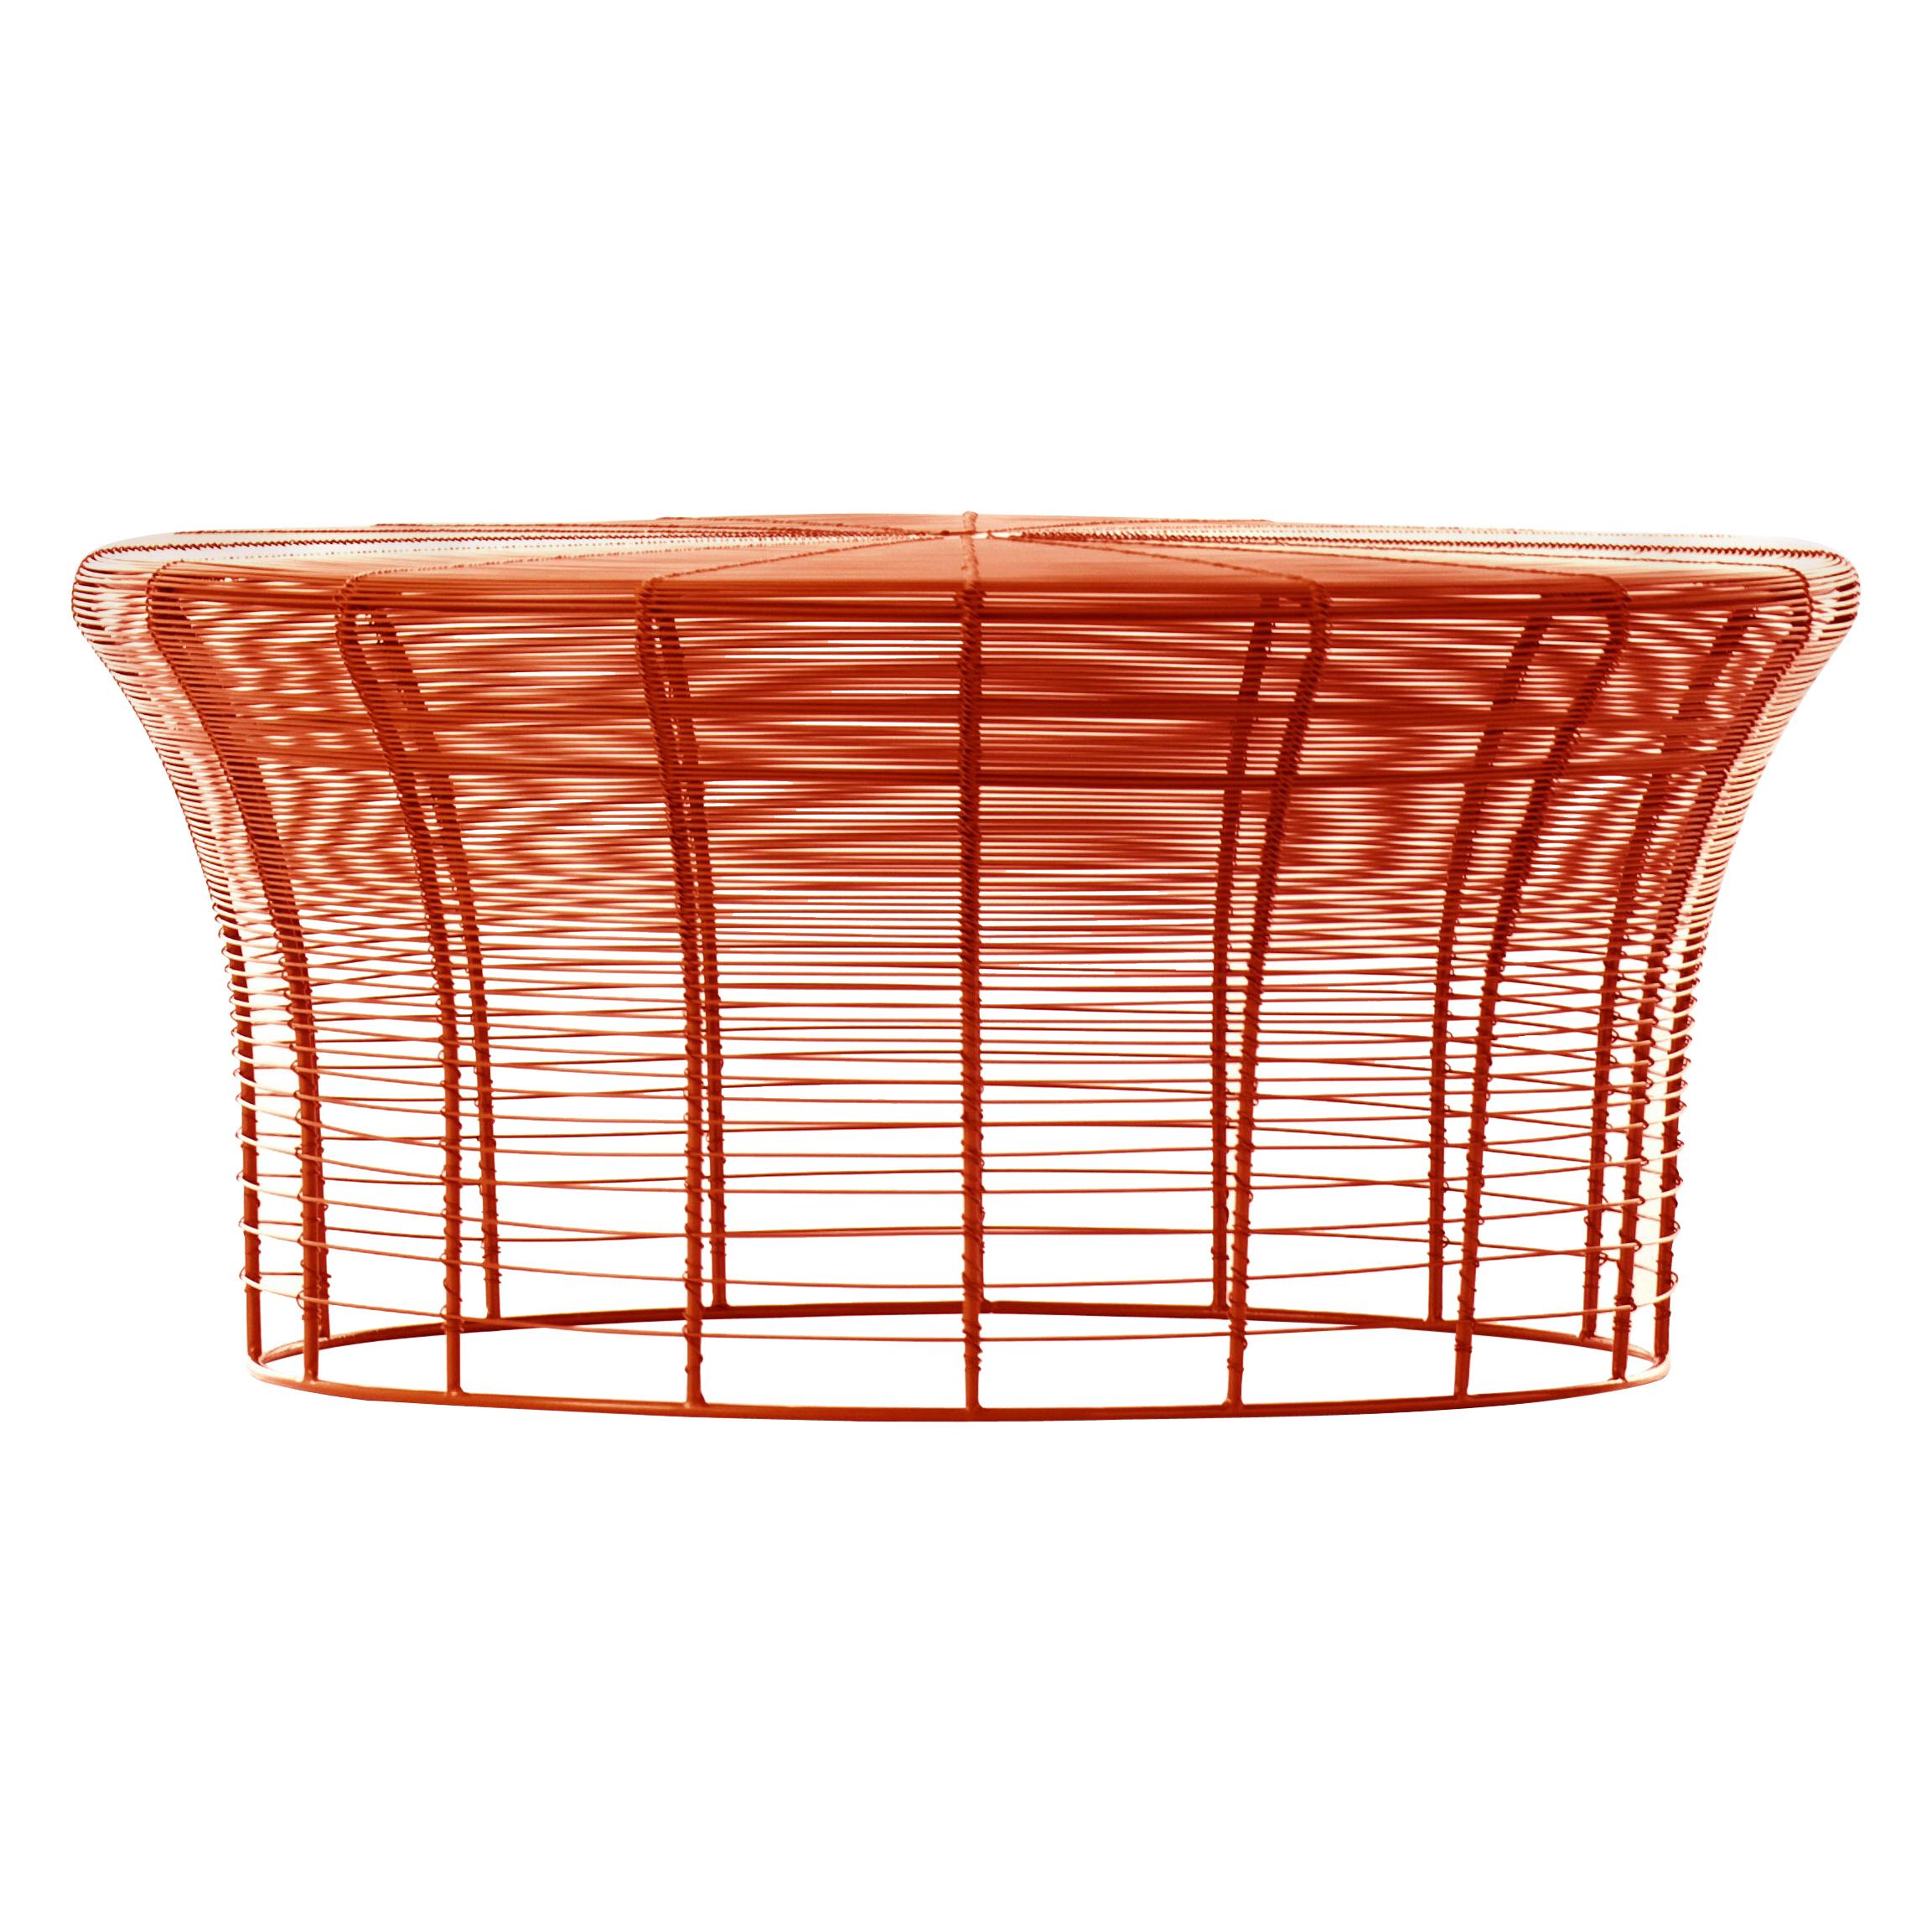 GAN Aram Low Table in Red and Orange by Nendo